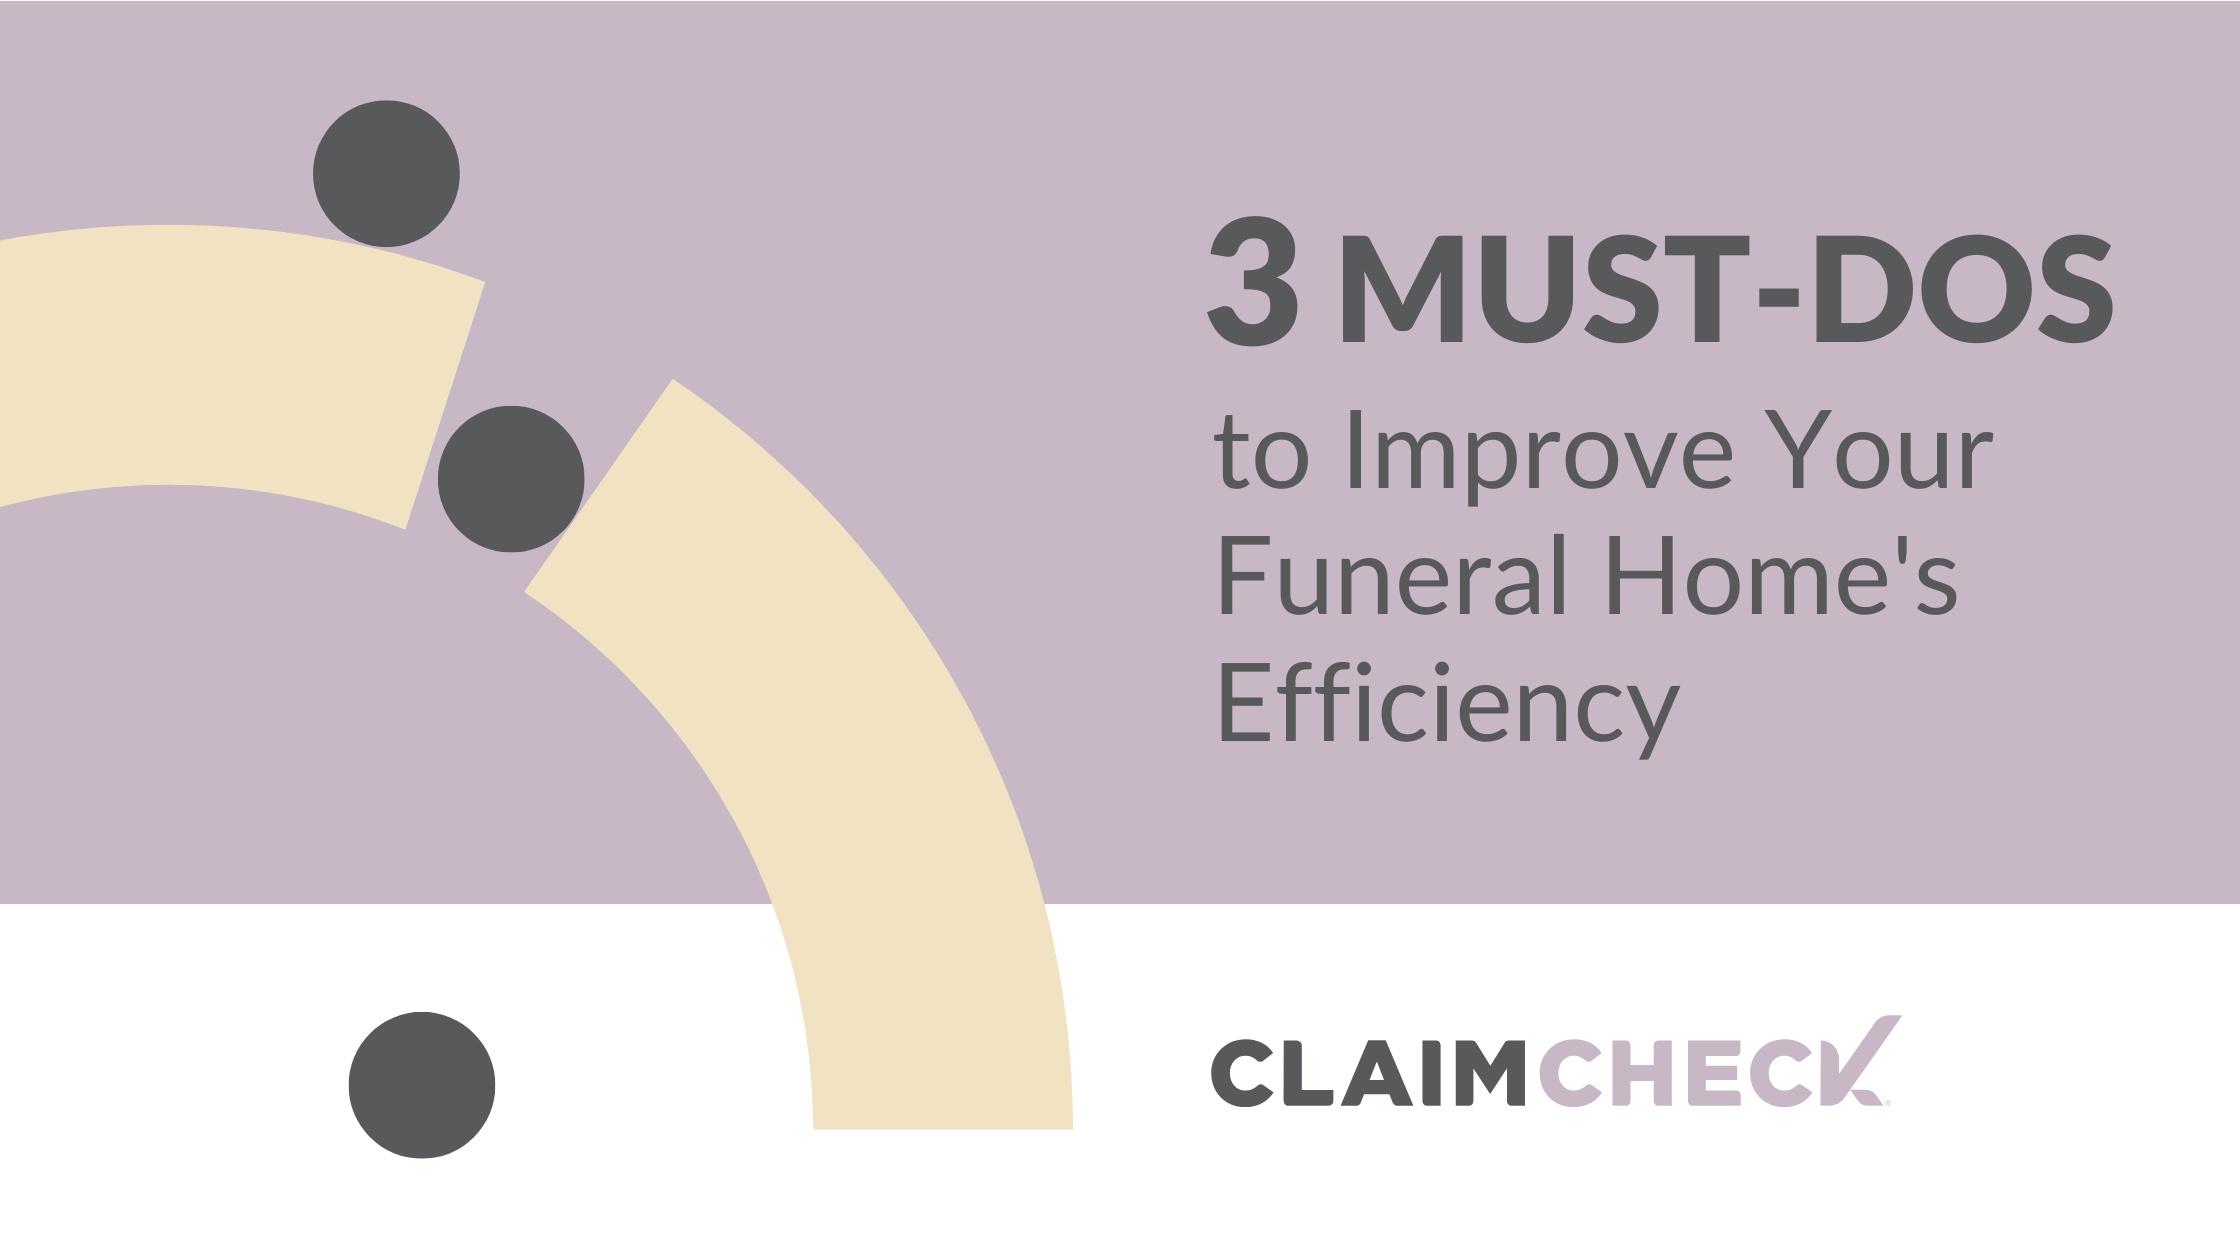 3 Must-Dos to Improve Your Funeral Home's Efficiency